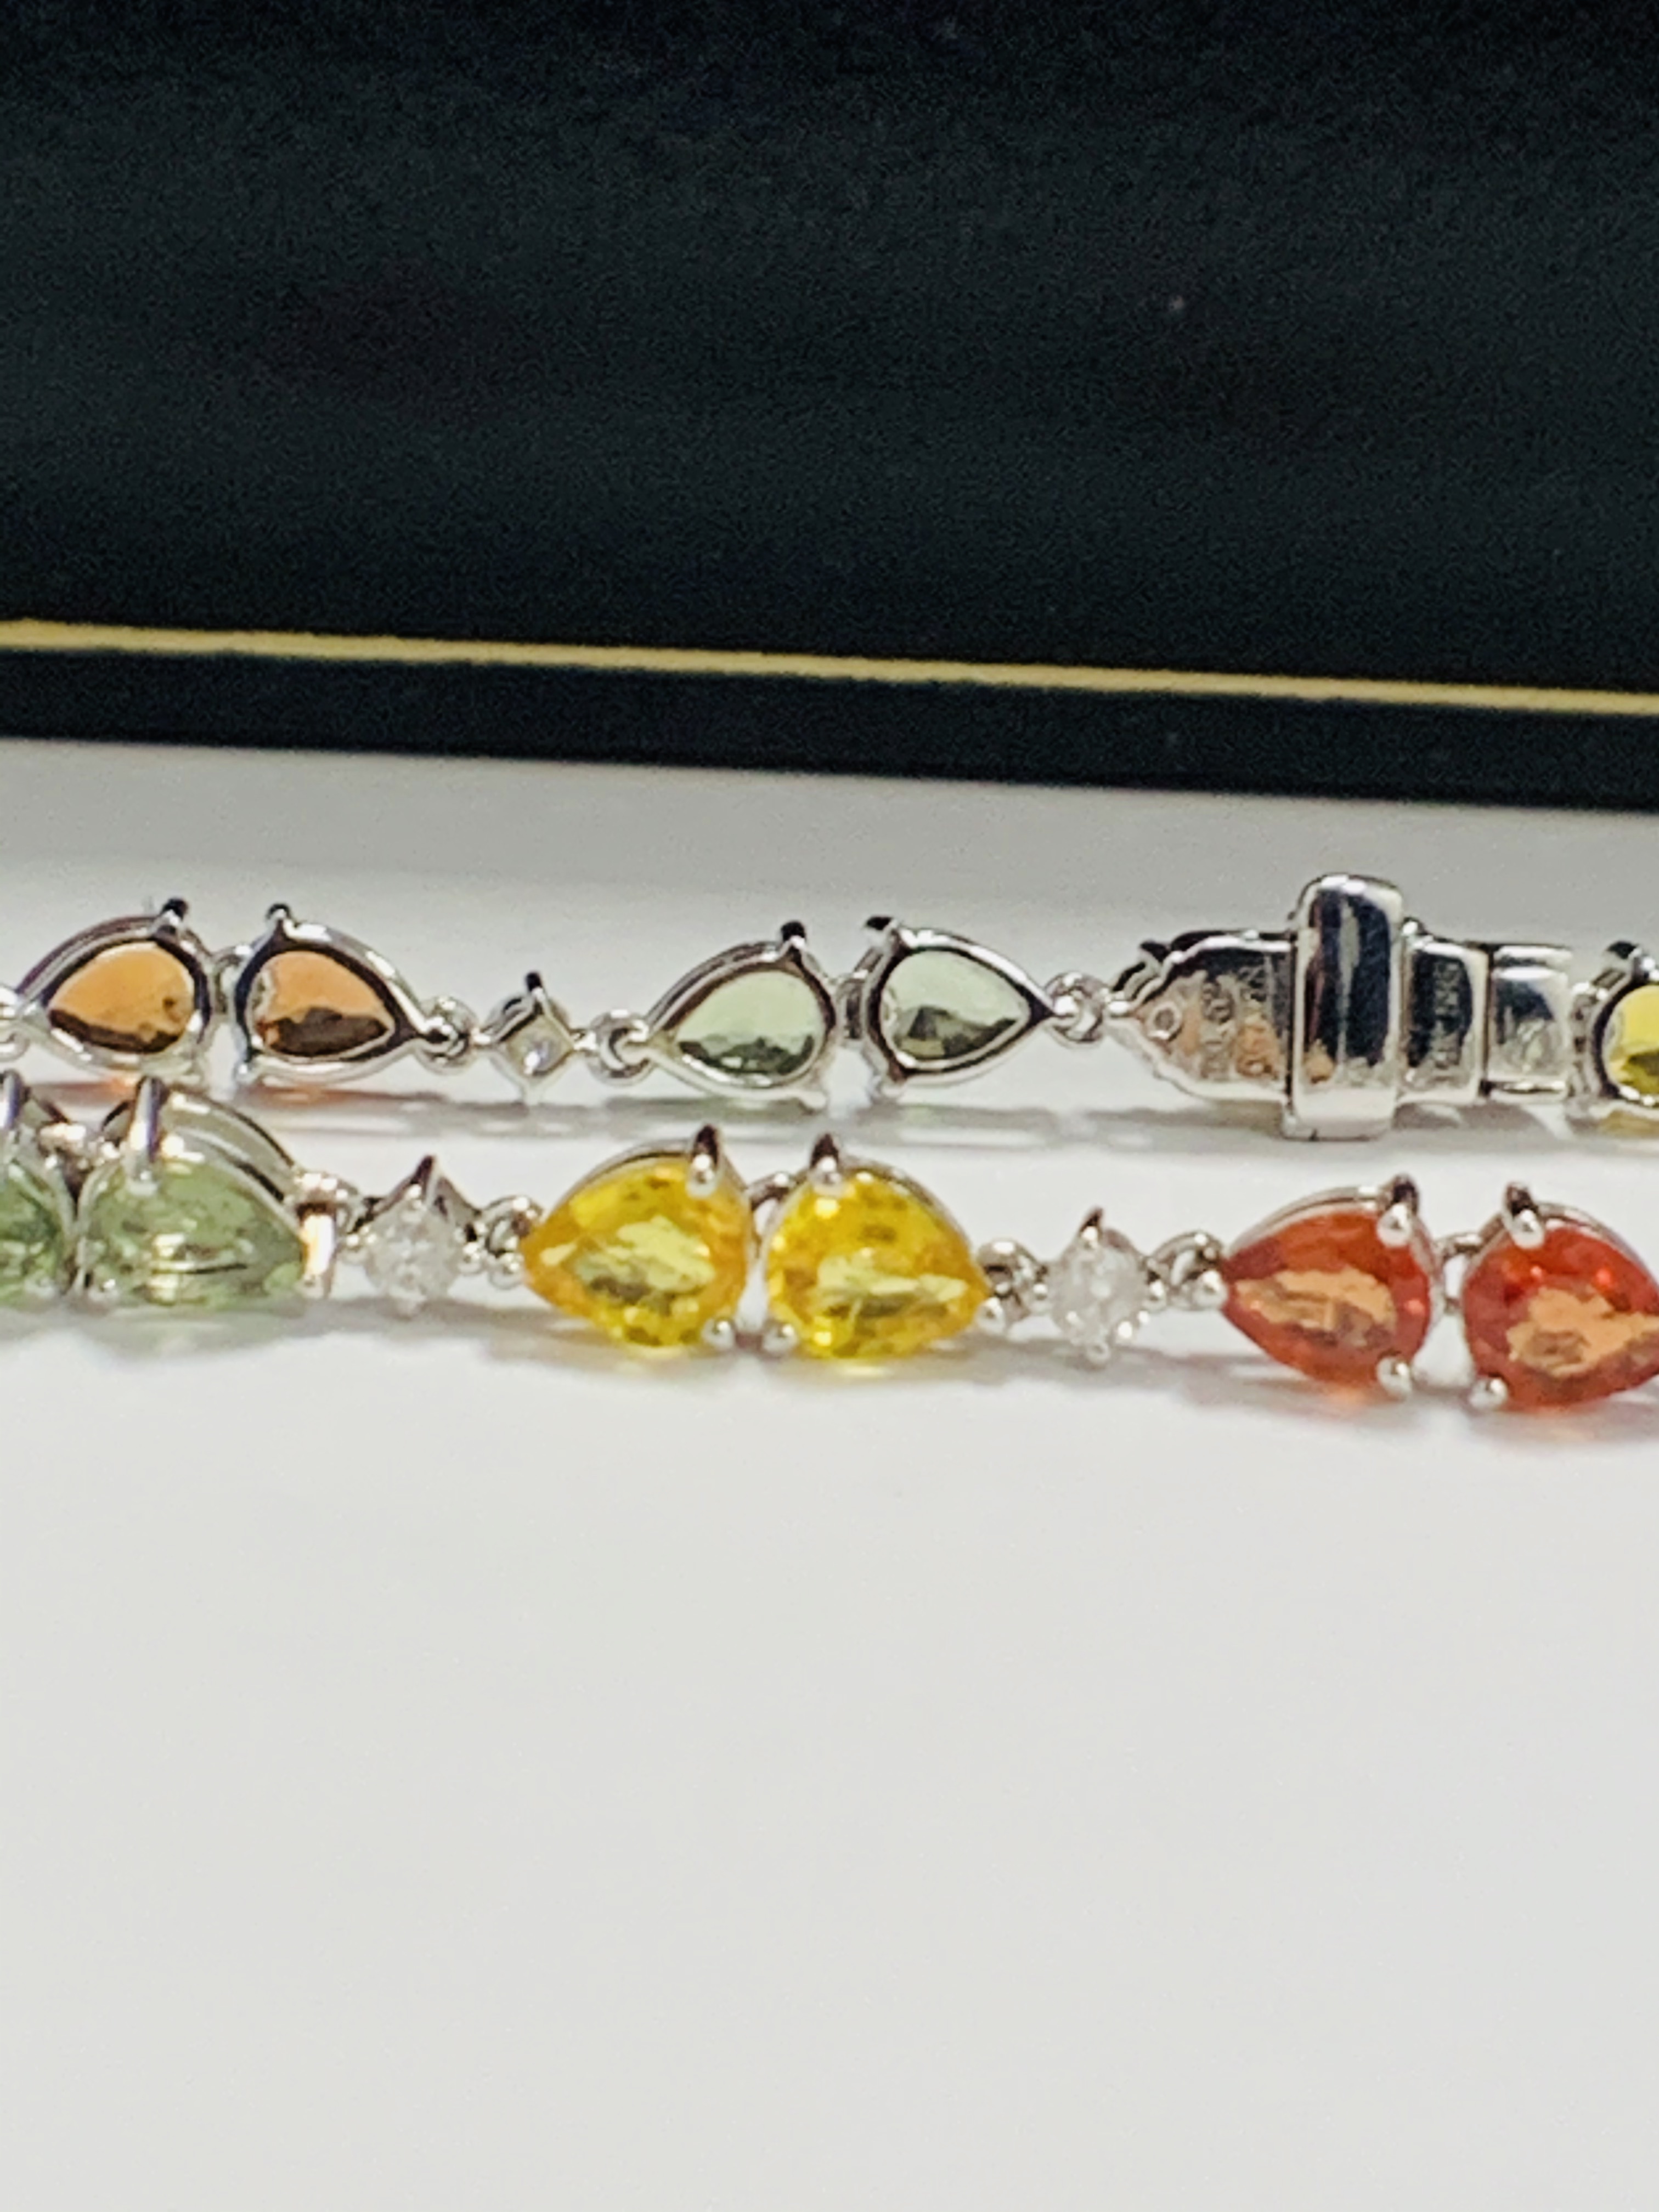 14ct White Gold Sapphire and Diamond bracelet featuring, 22 pear cut, yellow, green and orange Sapph - Image 14 of 24